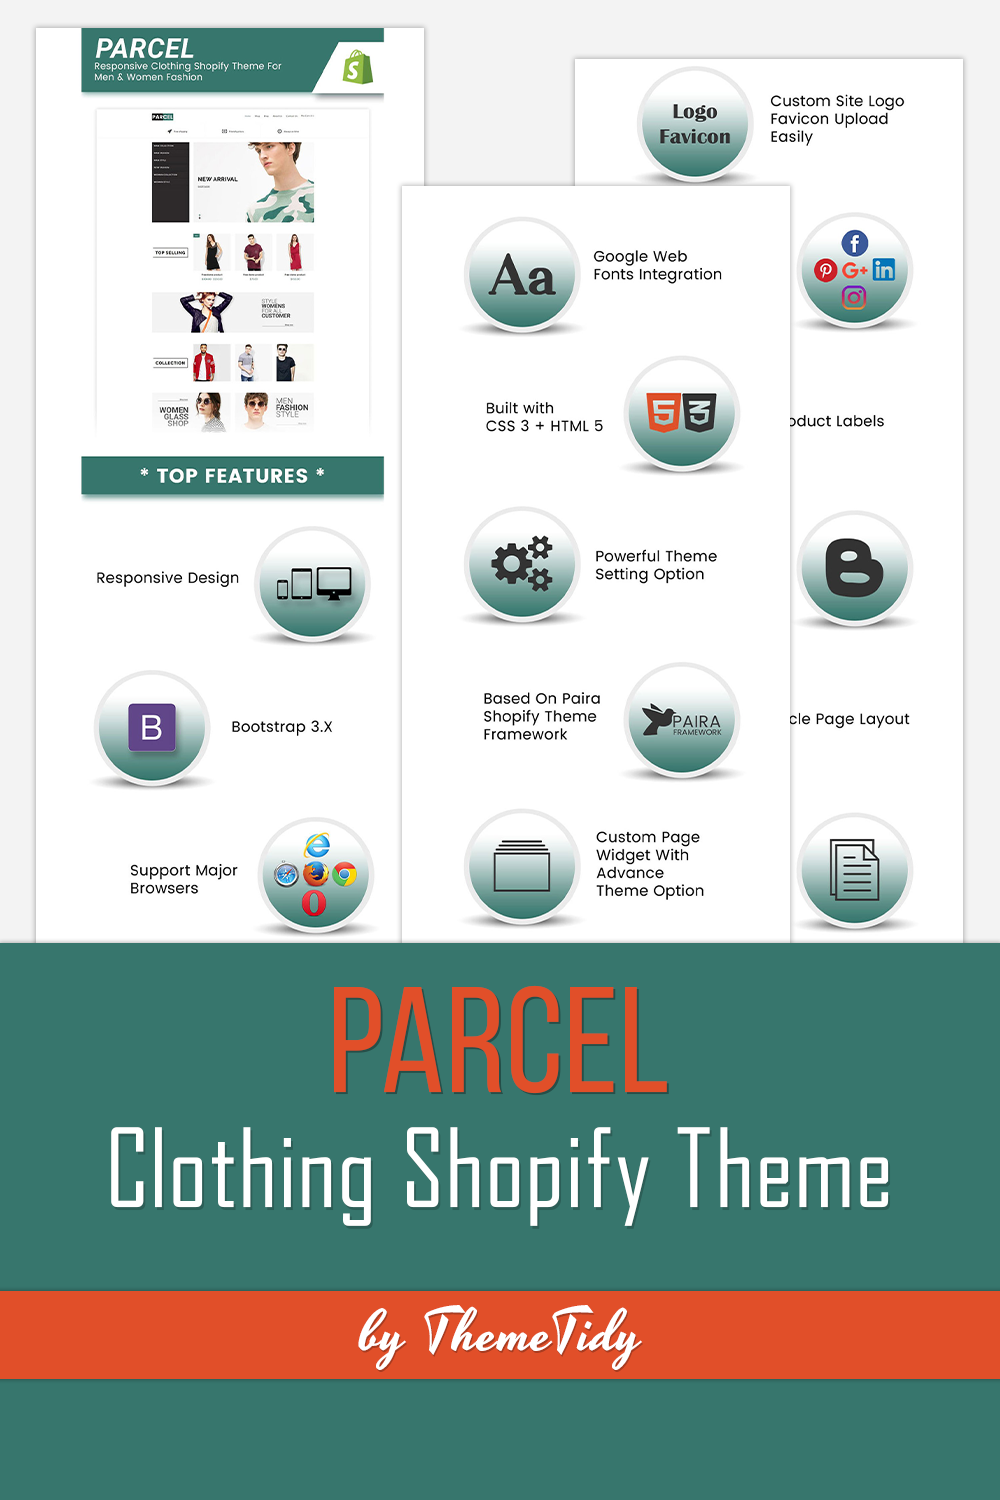 Parcel clothing shopify theme images of pinterest.